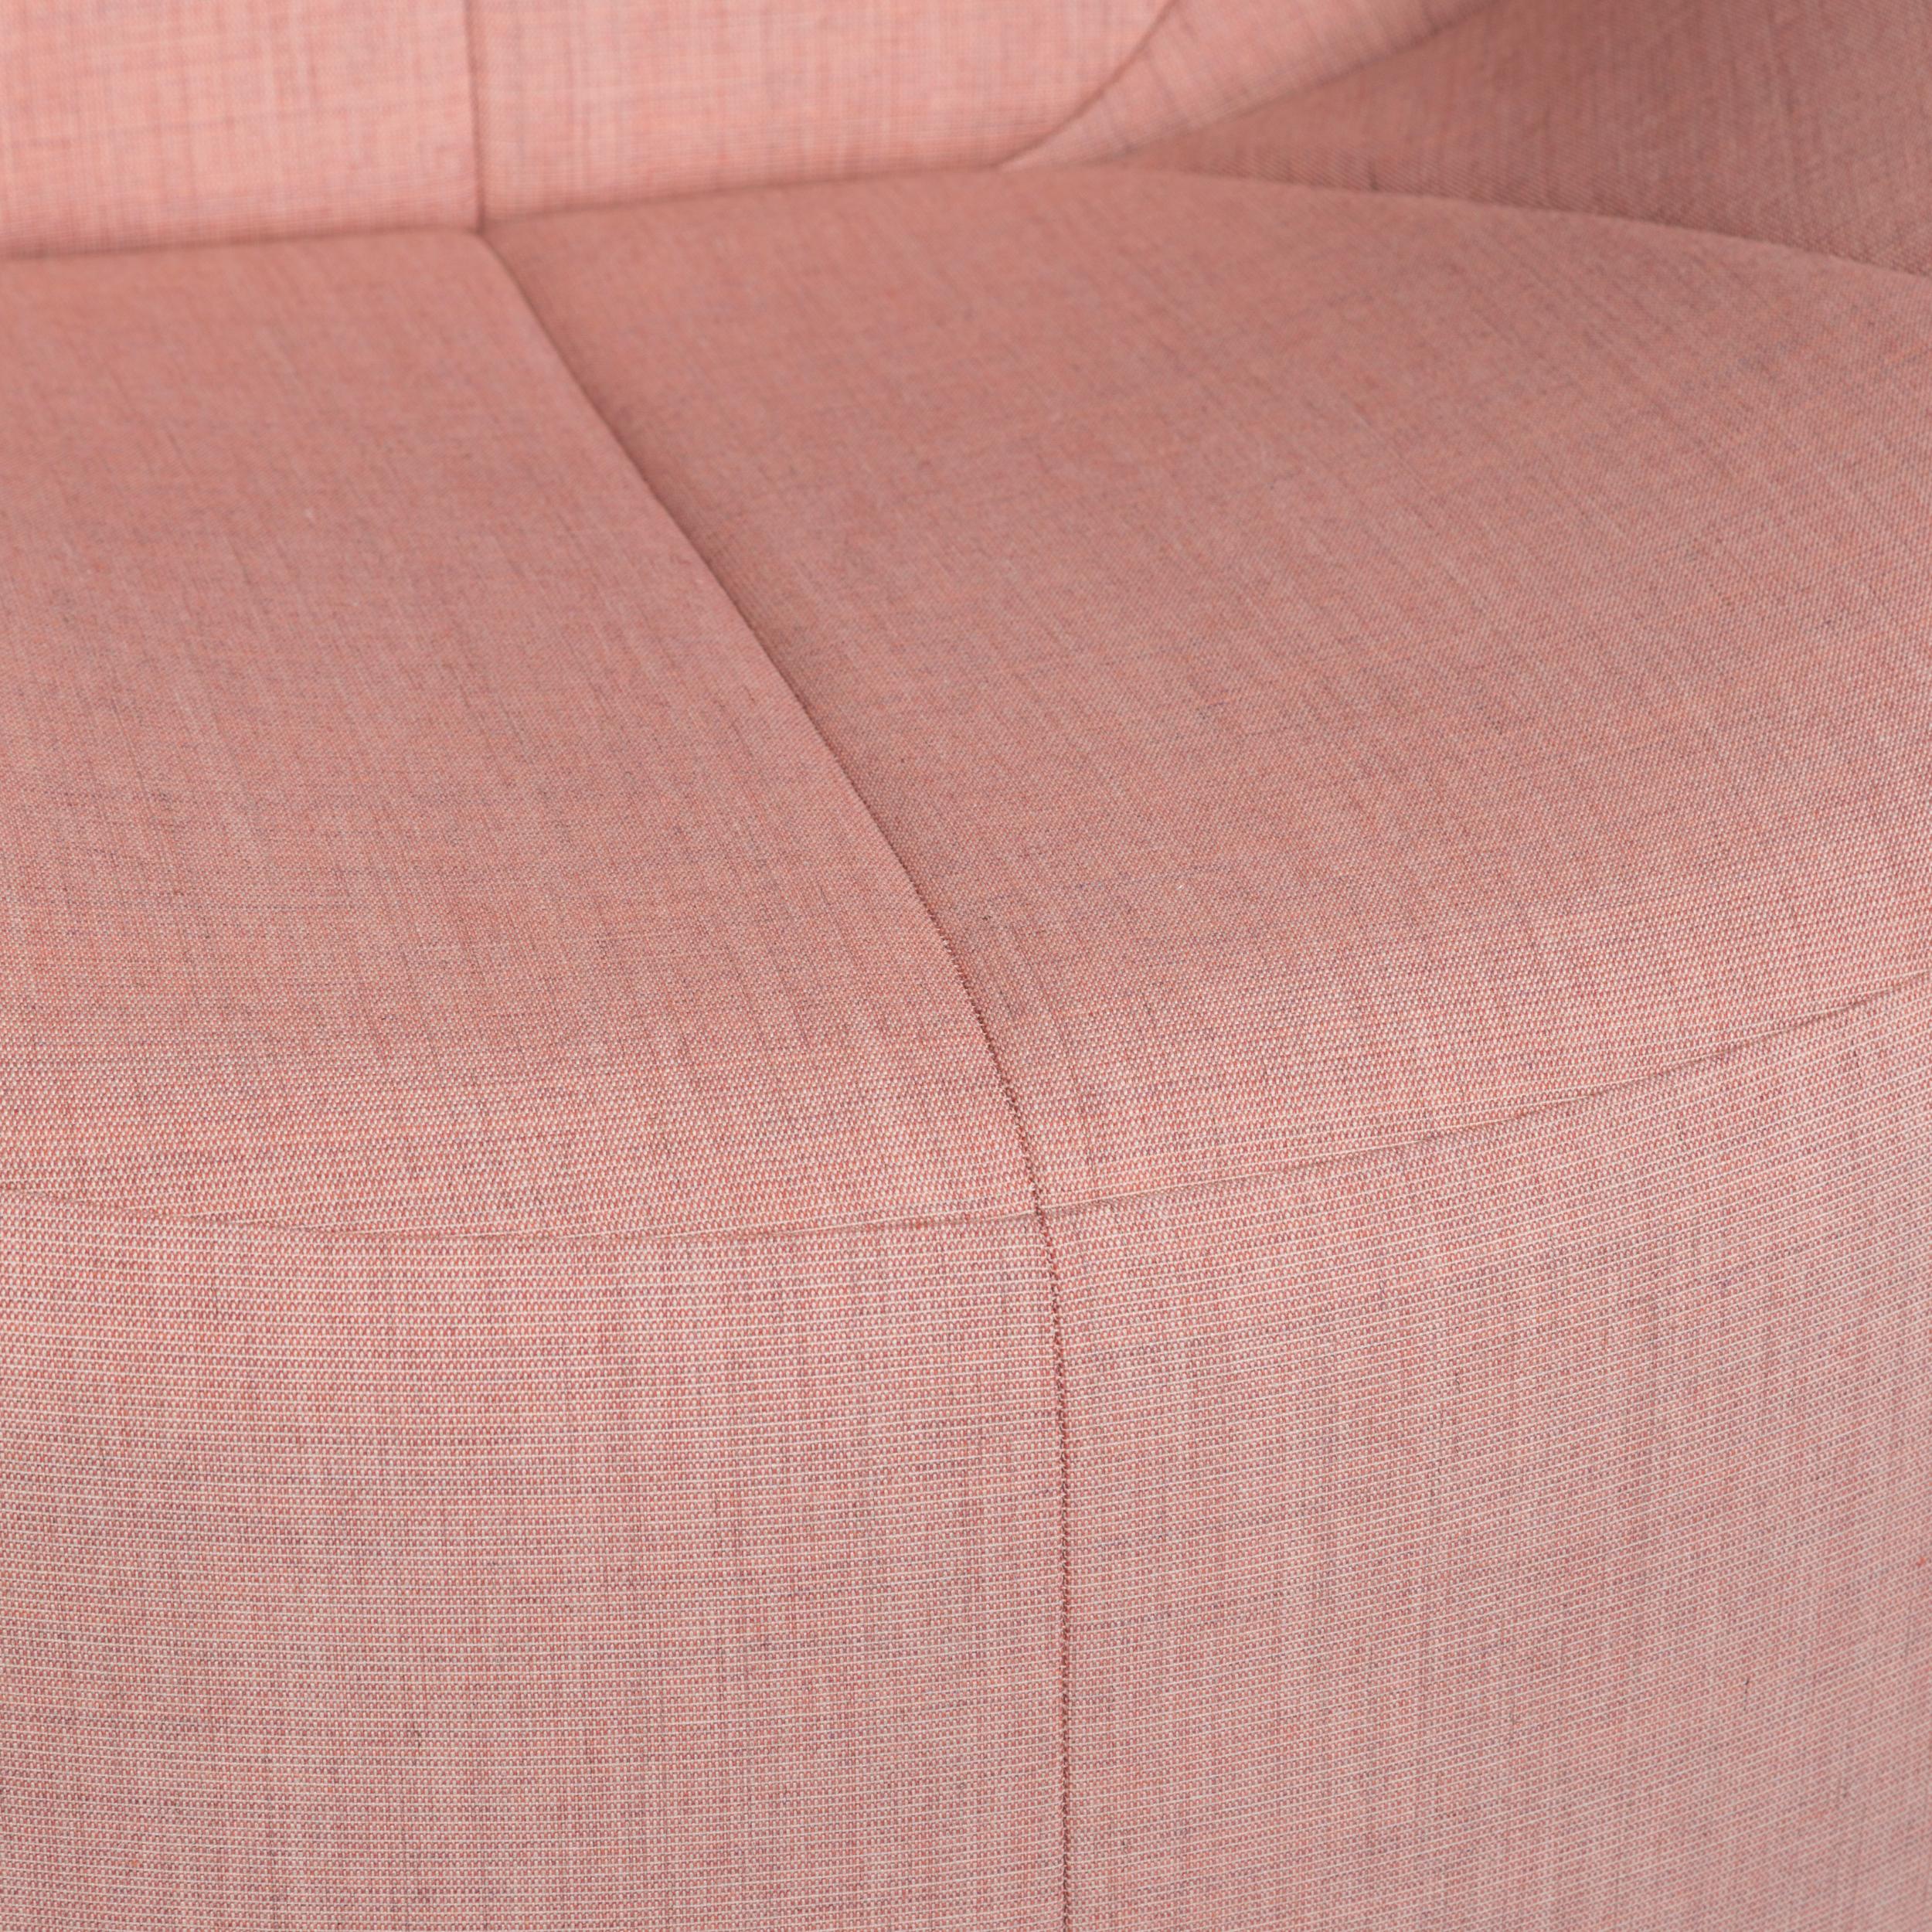 We bring to you a Ligne Roset pumpkin fabric armchair rosé Pierre Paulin.

 

 Product measurements in centimeters:
 

Depth 85
Width 105
Height 70
Seat-height 37
Rest-height 52
Seat-depth 51
Seat-width 48
Back-height 36.